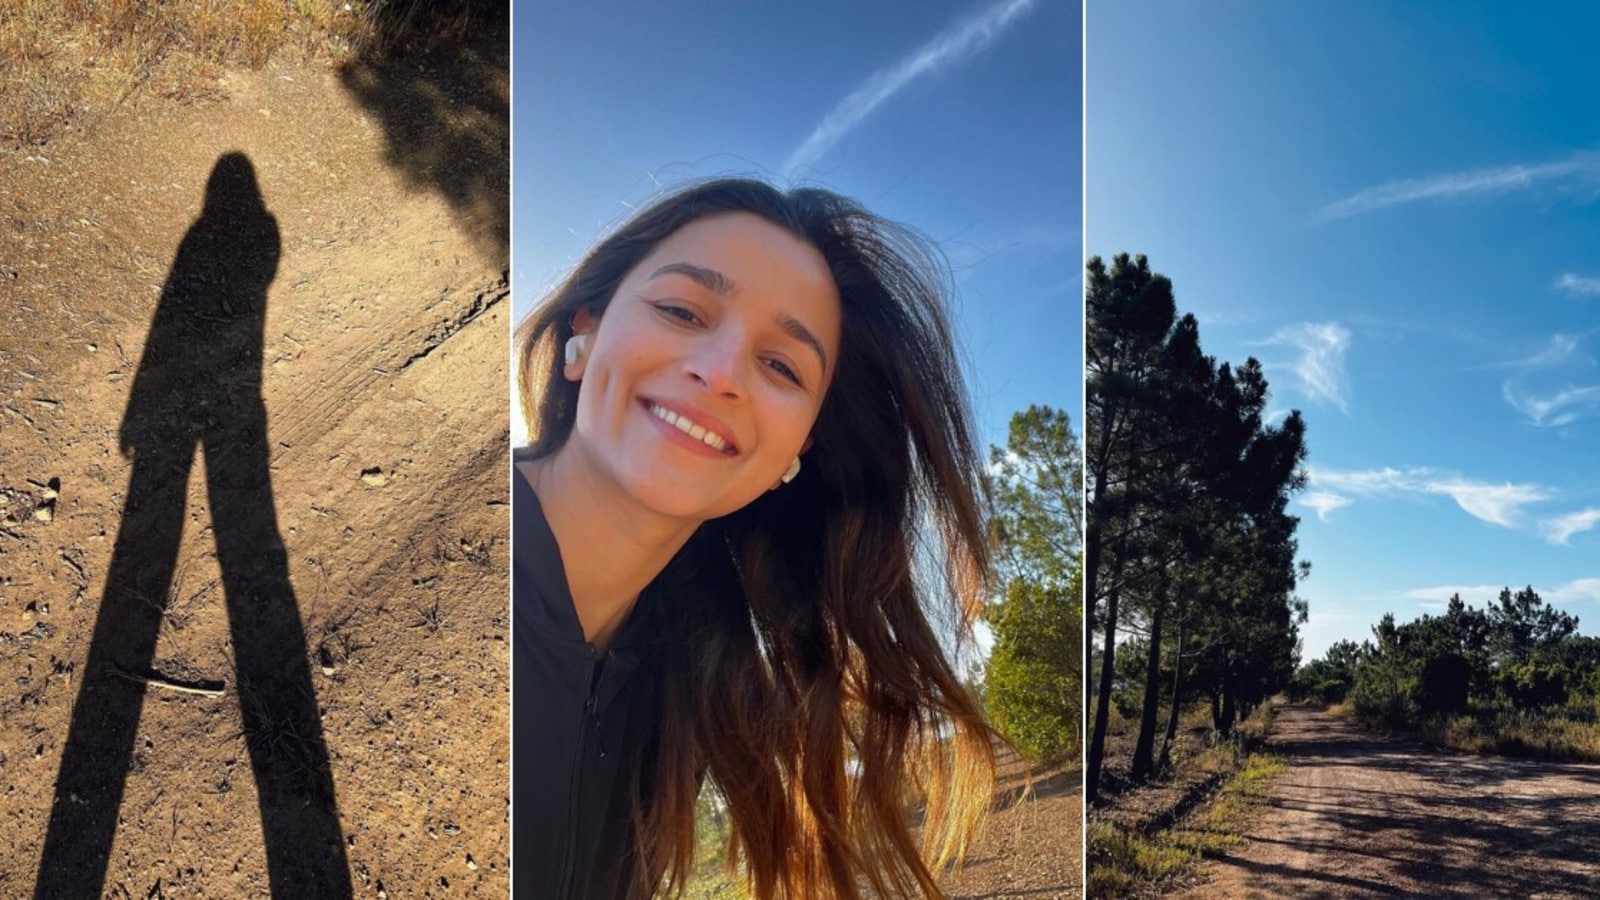 Alia Bhatt takes a walk in Portugal, fans notice her ‘pregnancy glow’. See pics